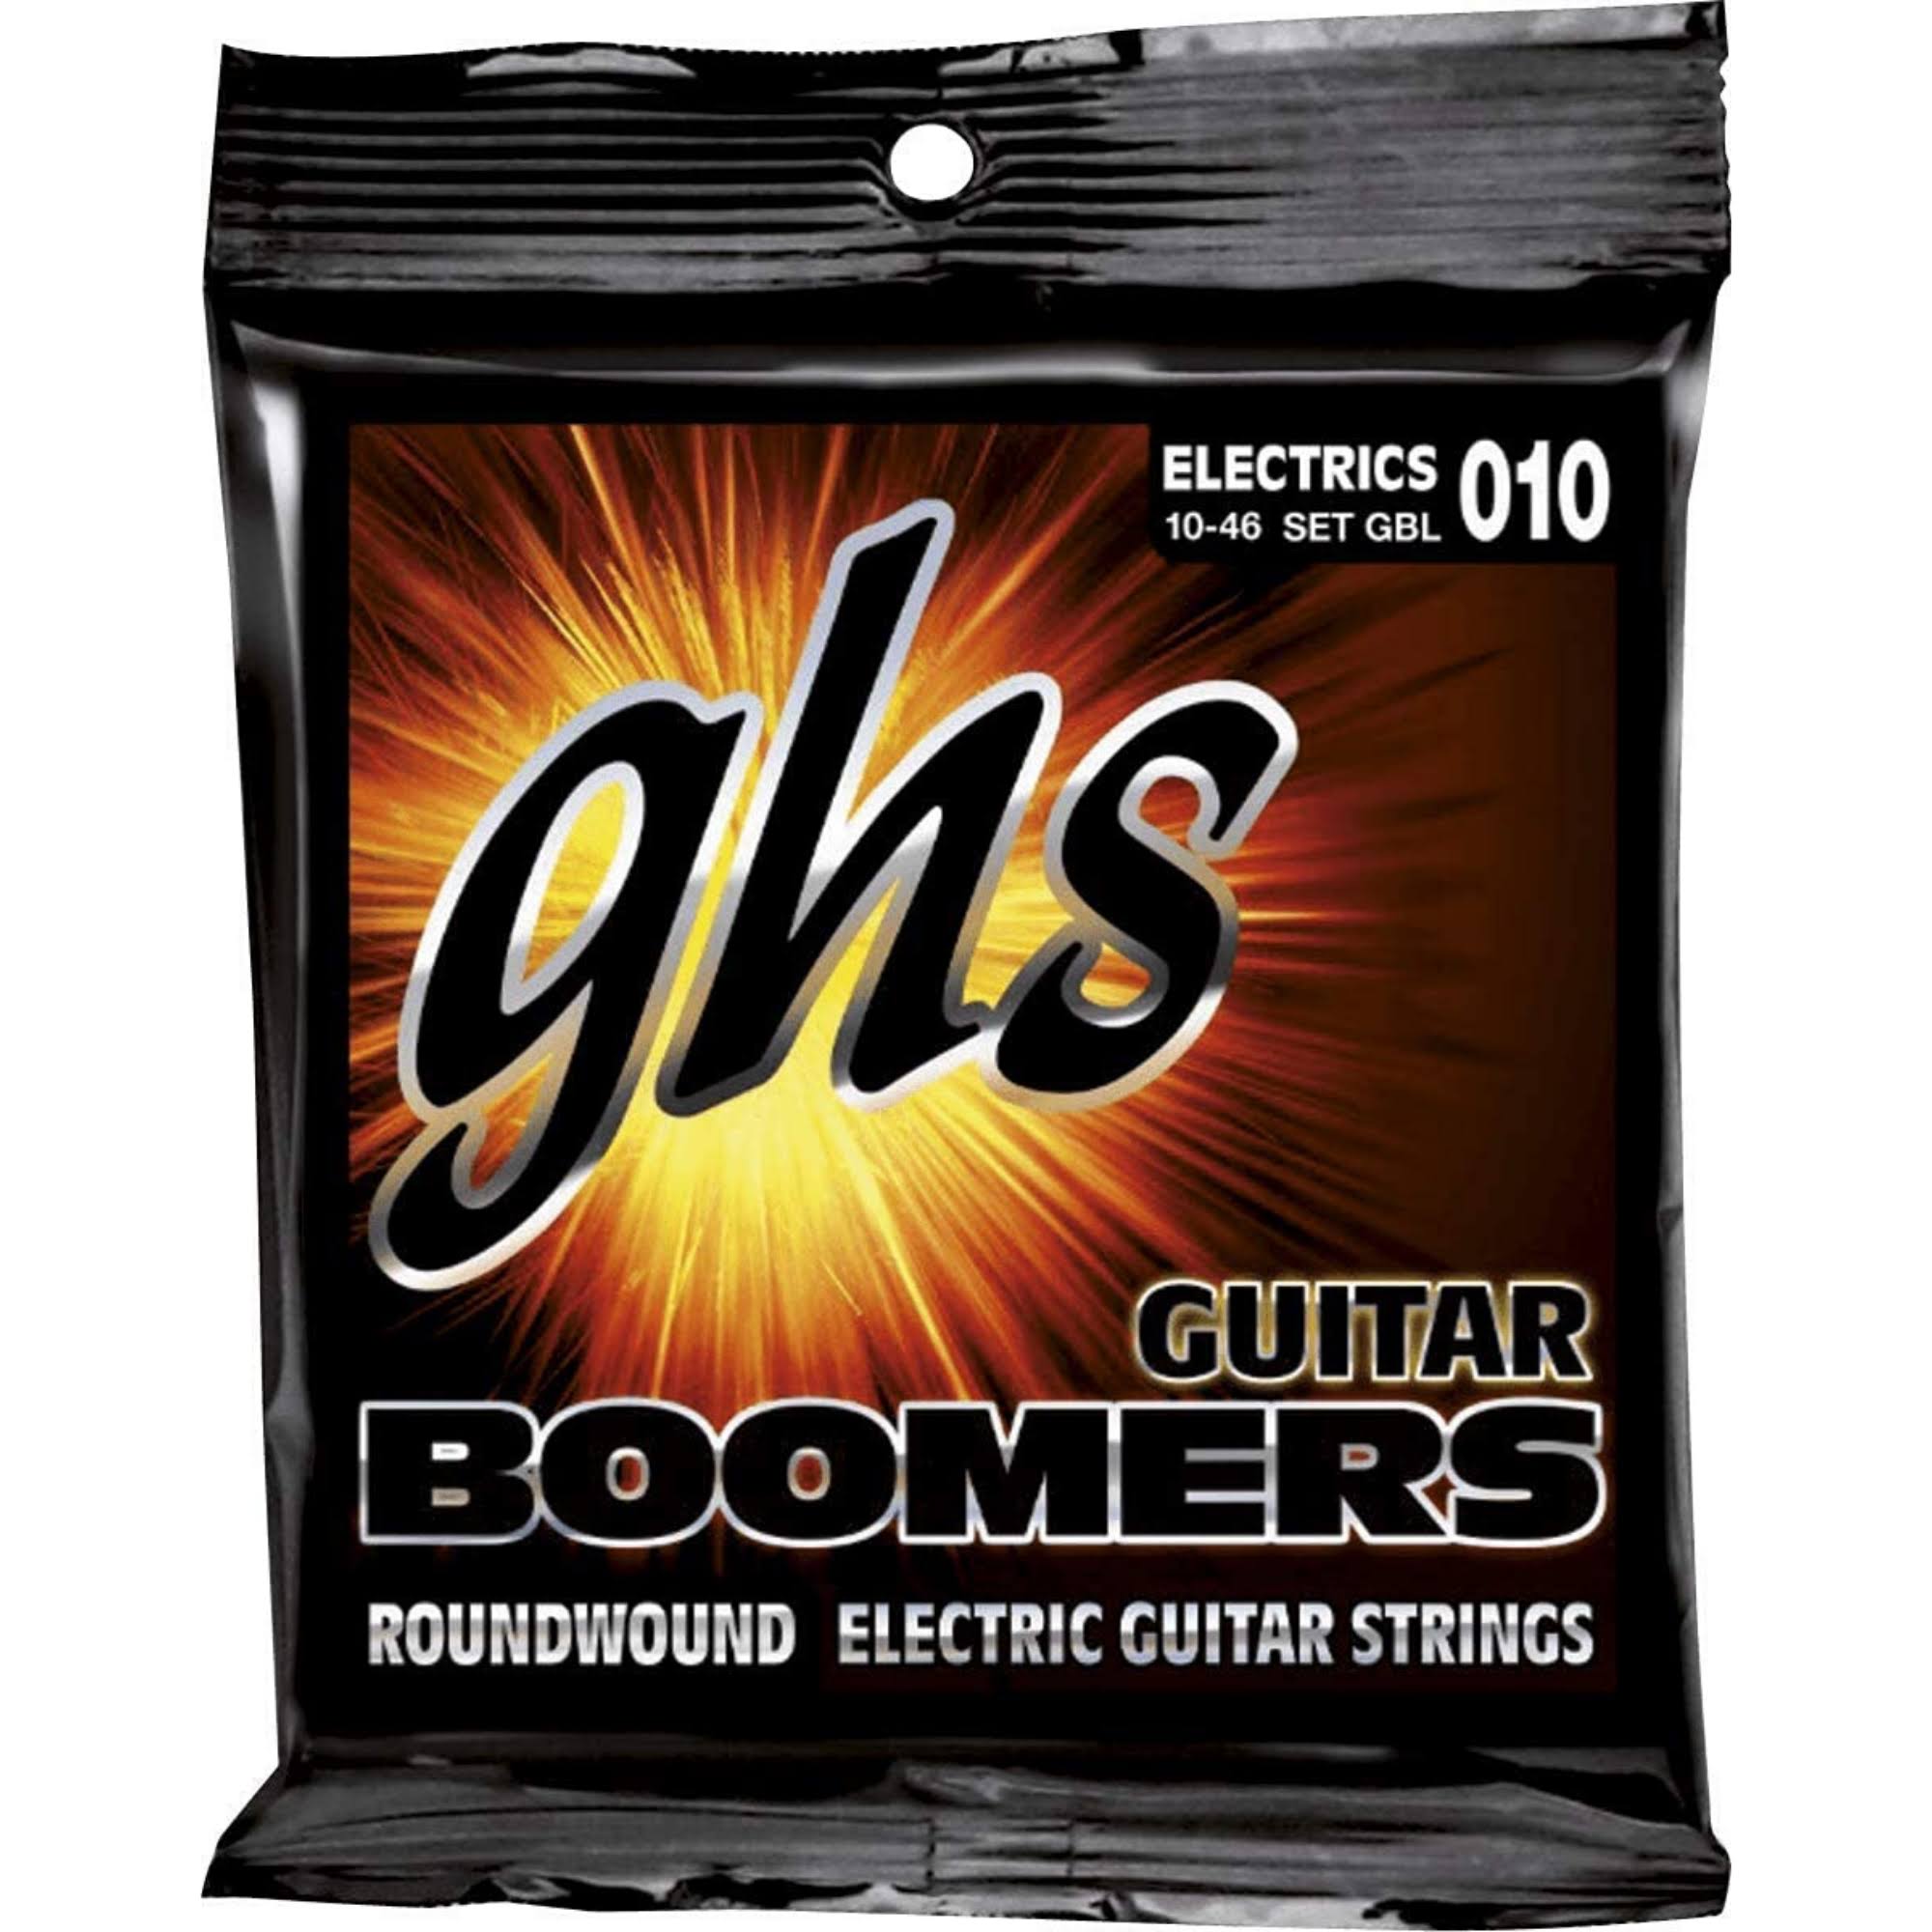 GHS GBL Guitar Boomers Roundwound Light Electric Guitar Strings - 010